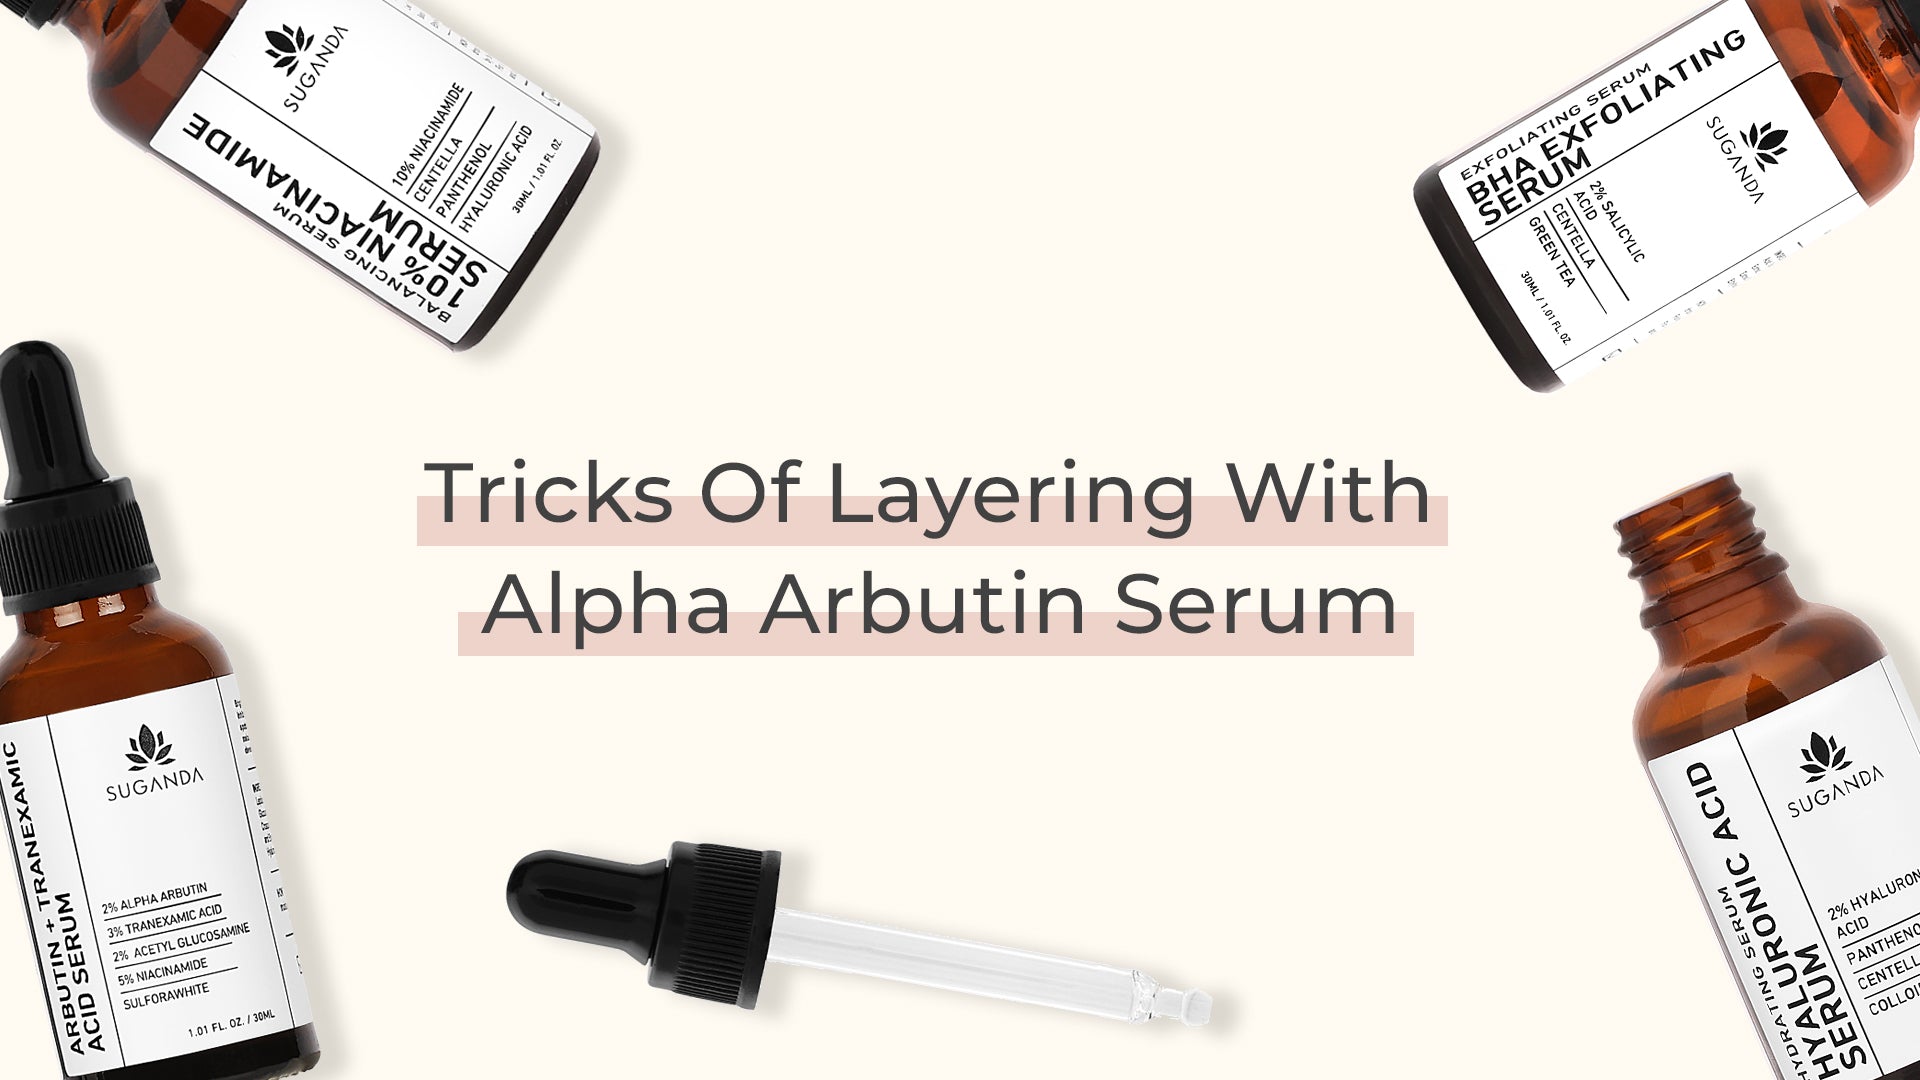 6 Tips And Tricks Of Layering With Alpha Arbutin Serum